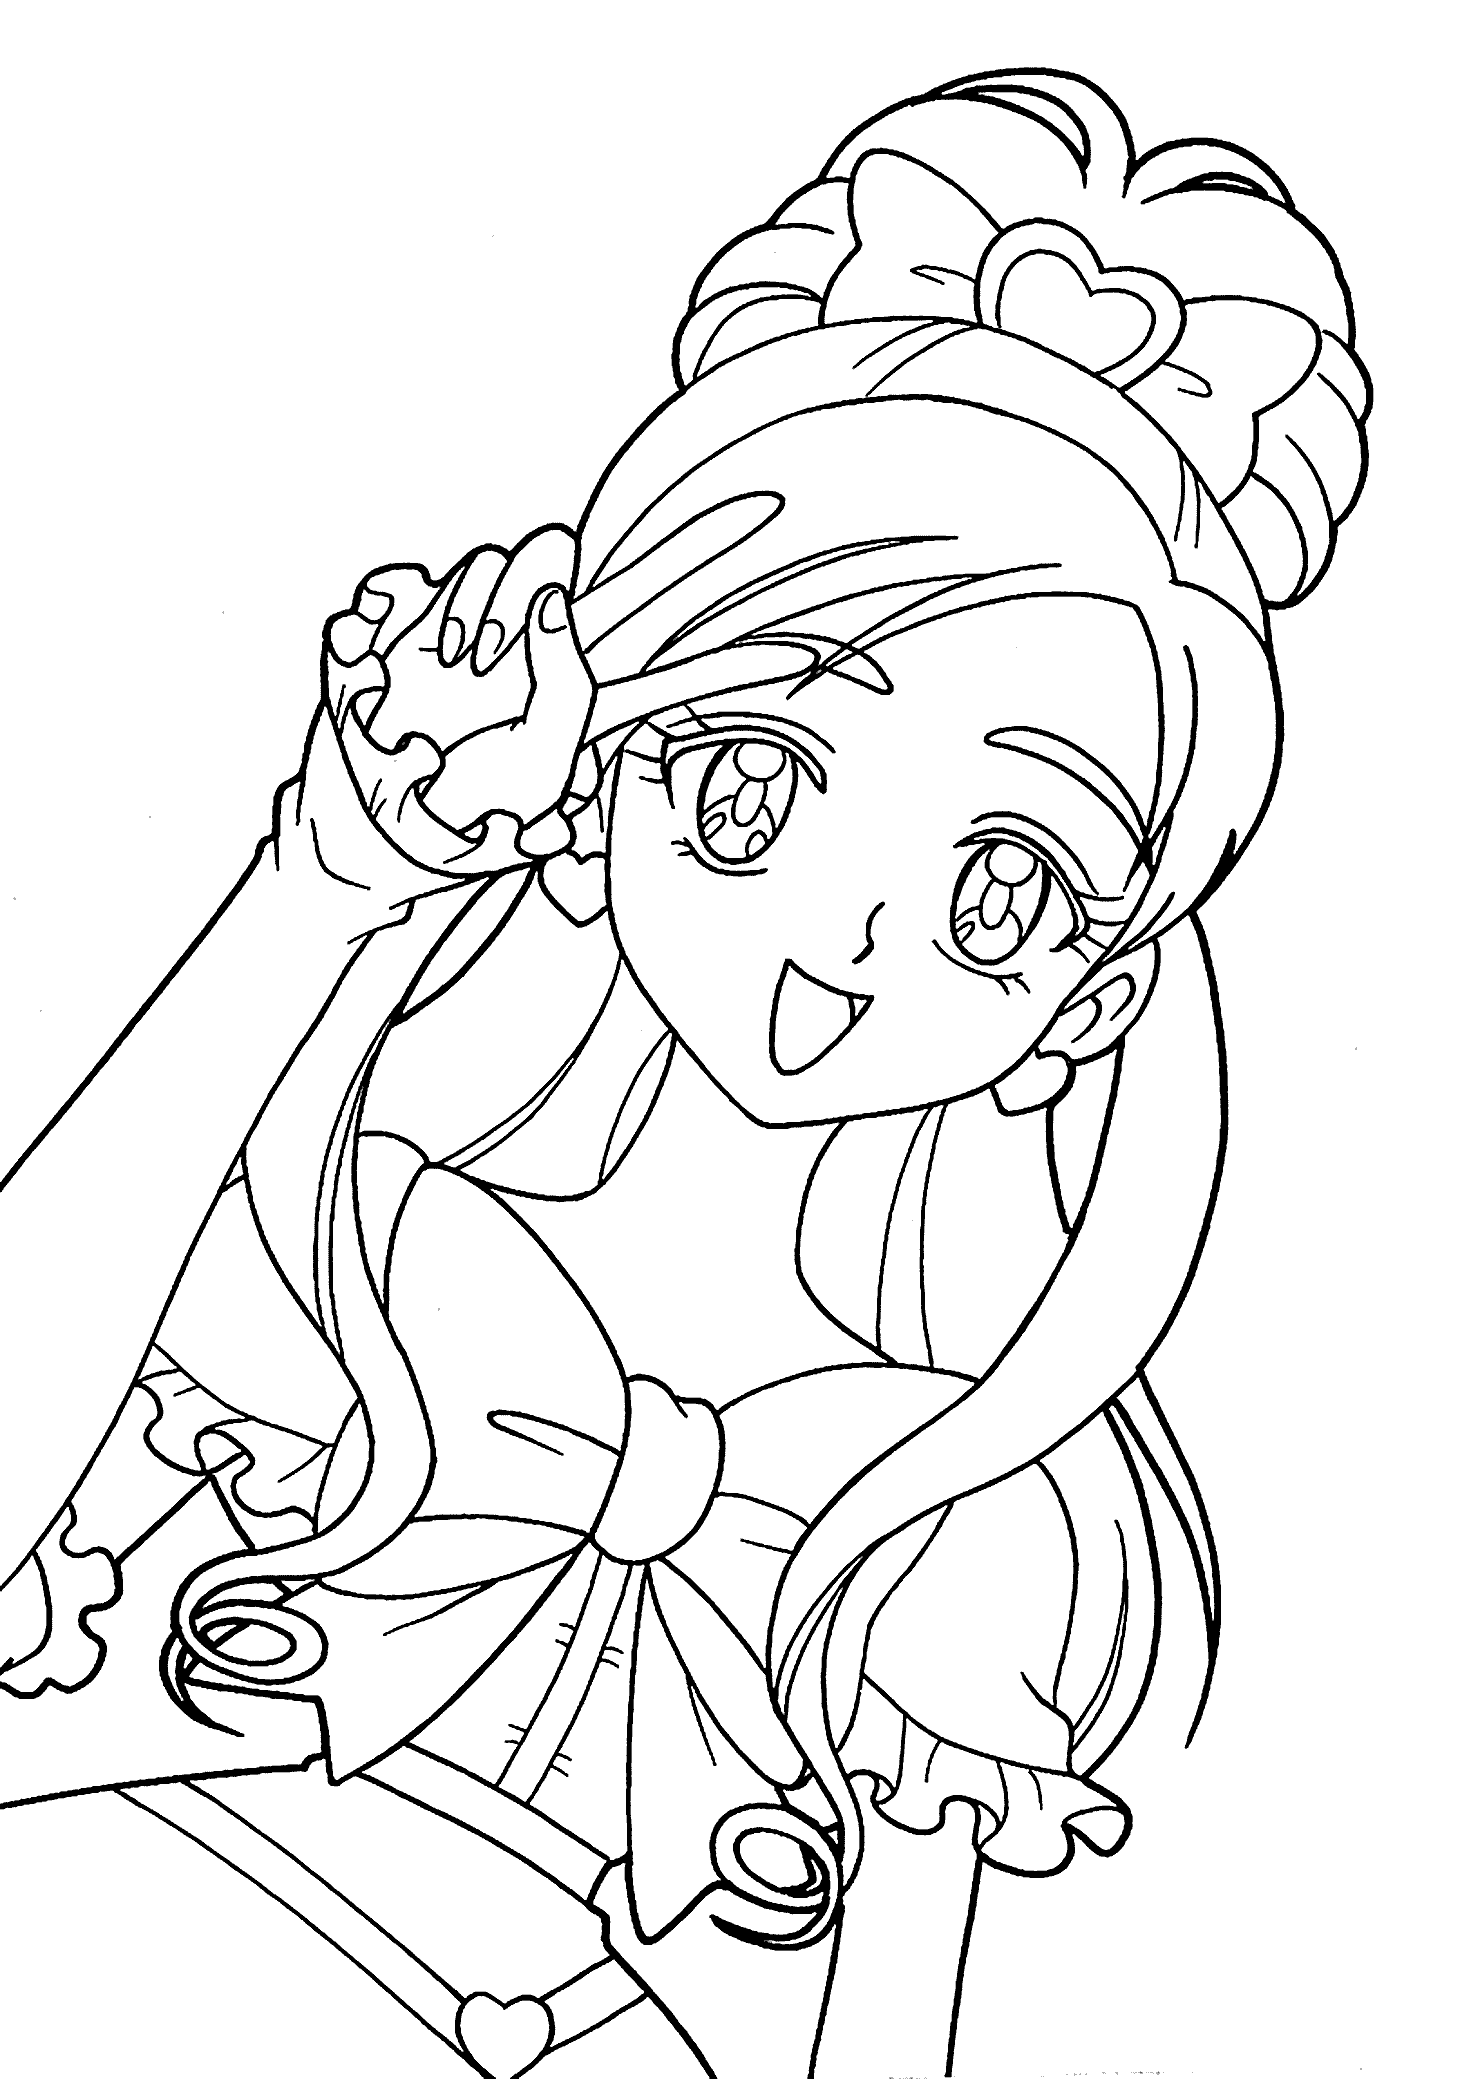 Free Printable Coloring Pages Of Swd Anime People Download Free Clip Art Free Clip Art On Clipart Library People around the world all love to dance, just like the happy boy on this colouring page! clipart library